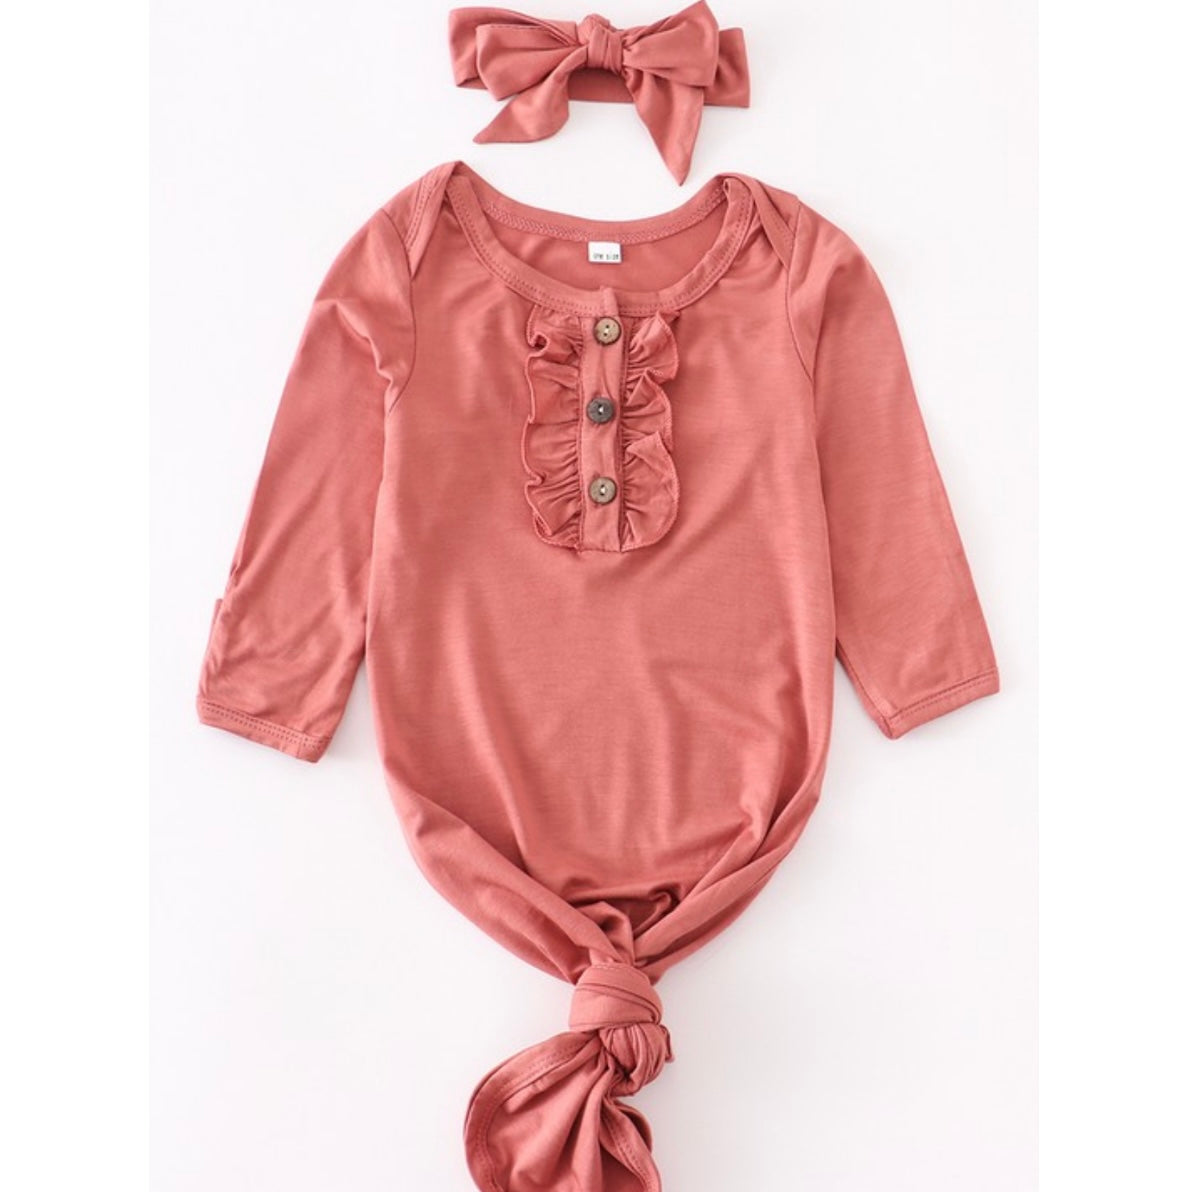 Ruffle Baby Gown